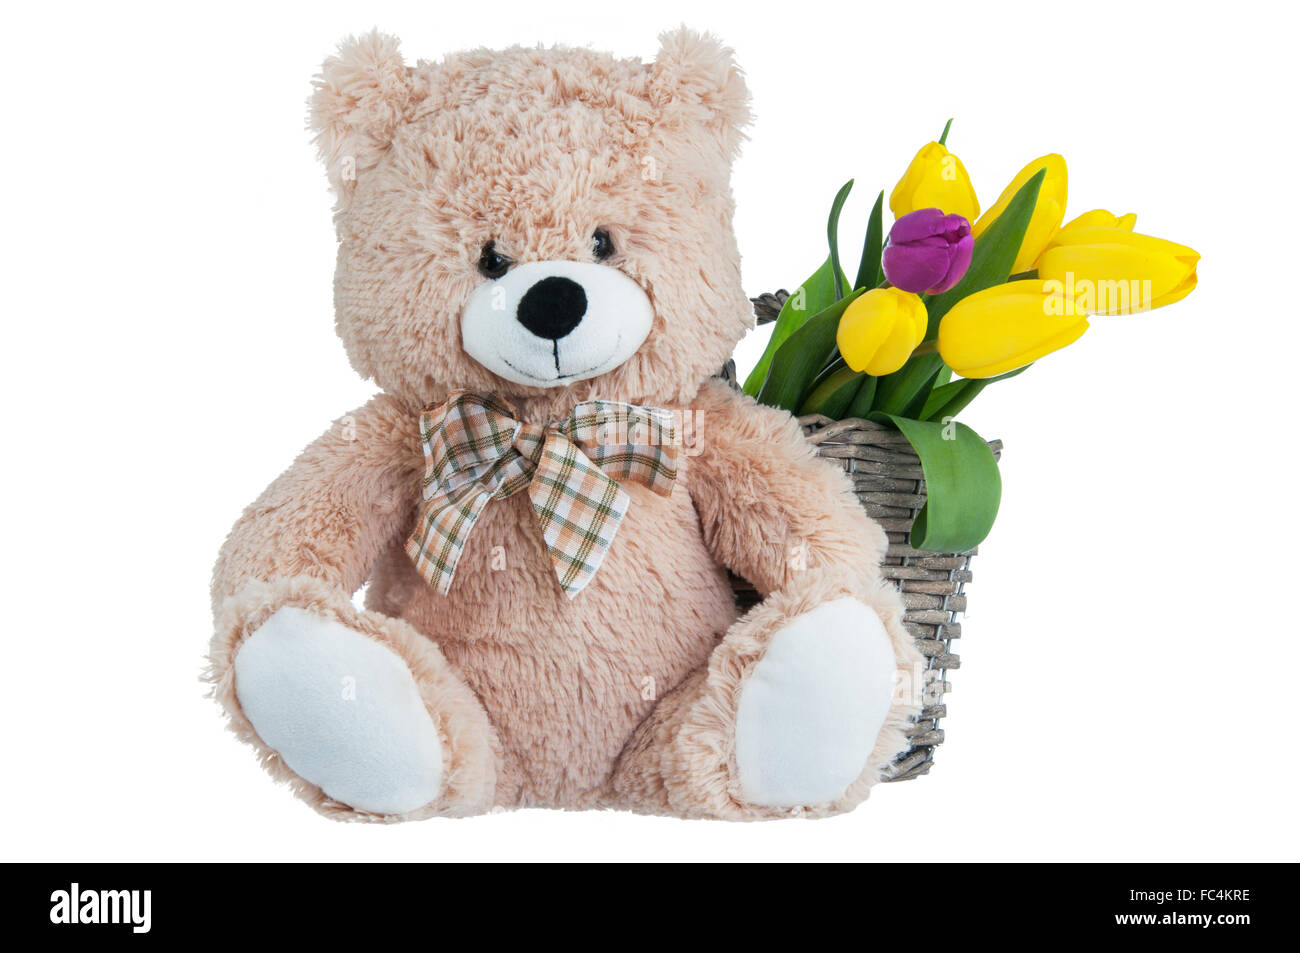 Yellow tulips and a teddy bear on white background. Stock Photo